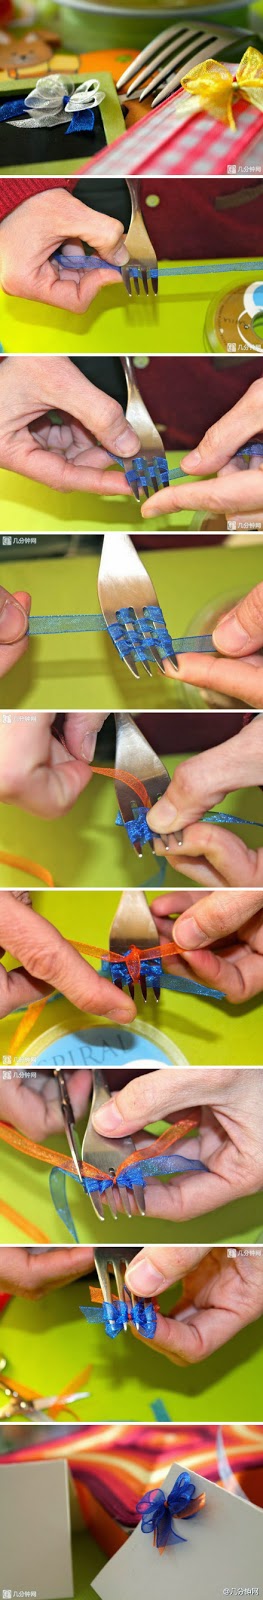 26 Clever And Inexpensive Crafting Hacks